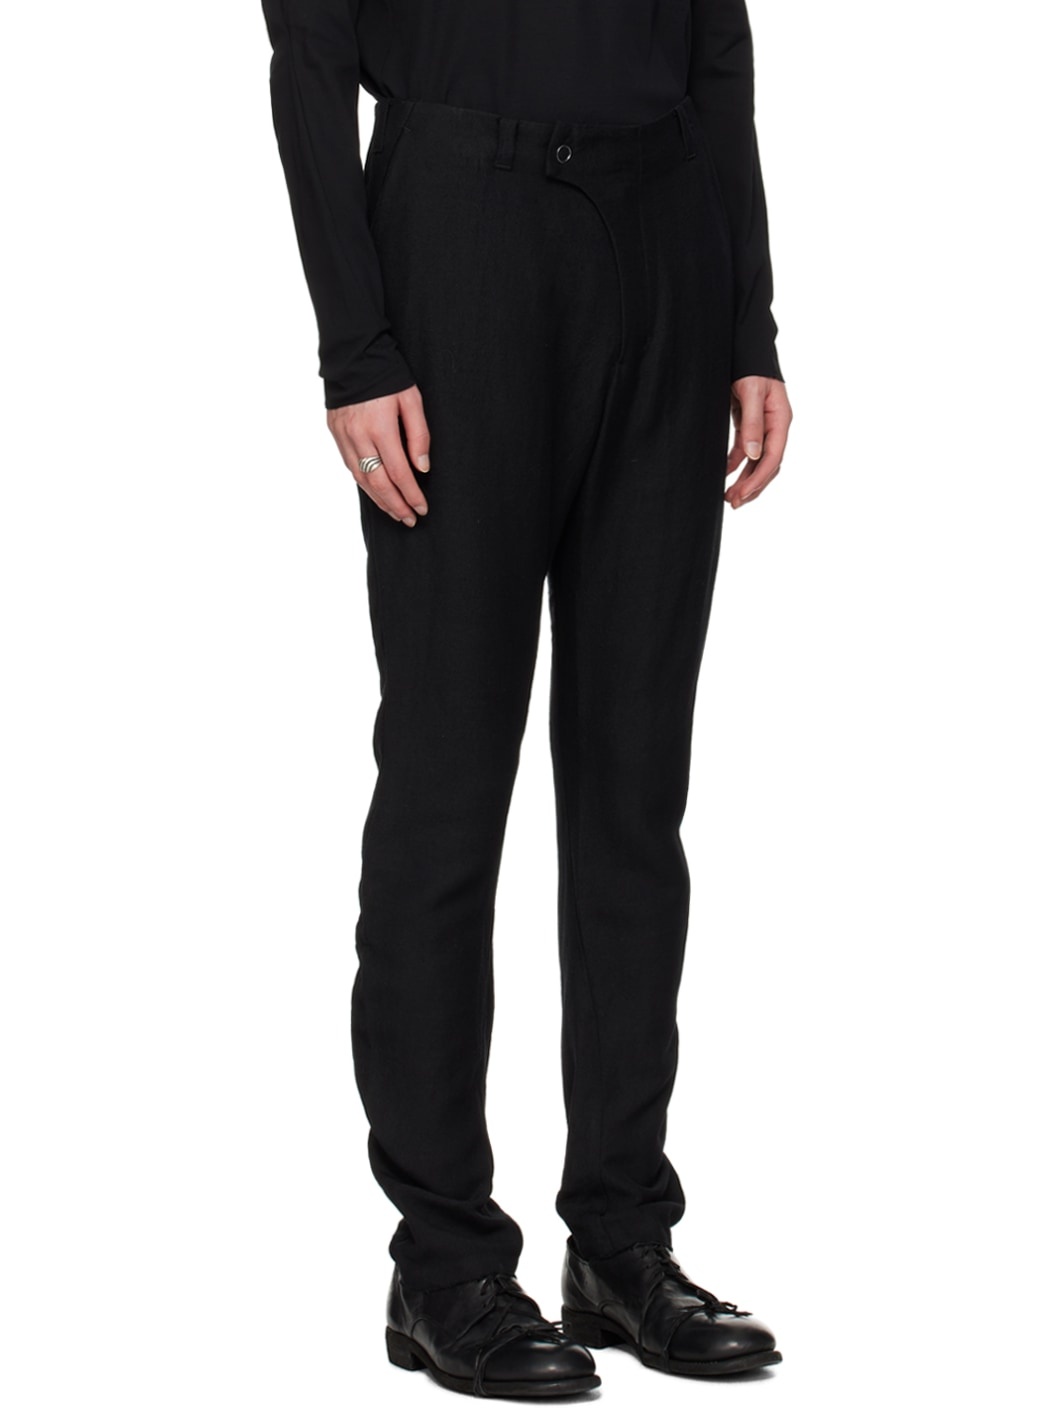 Black Curved Trousers - 2